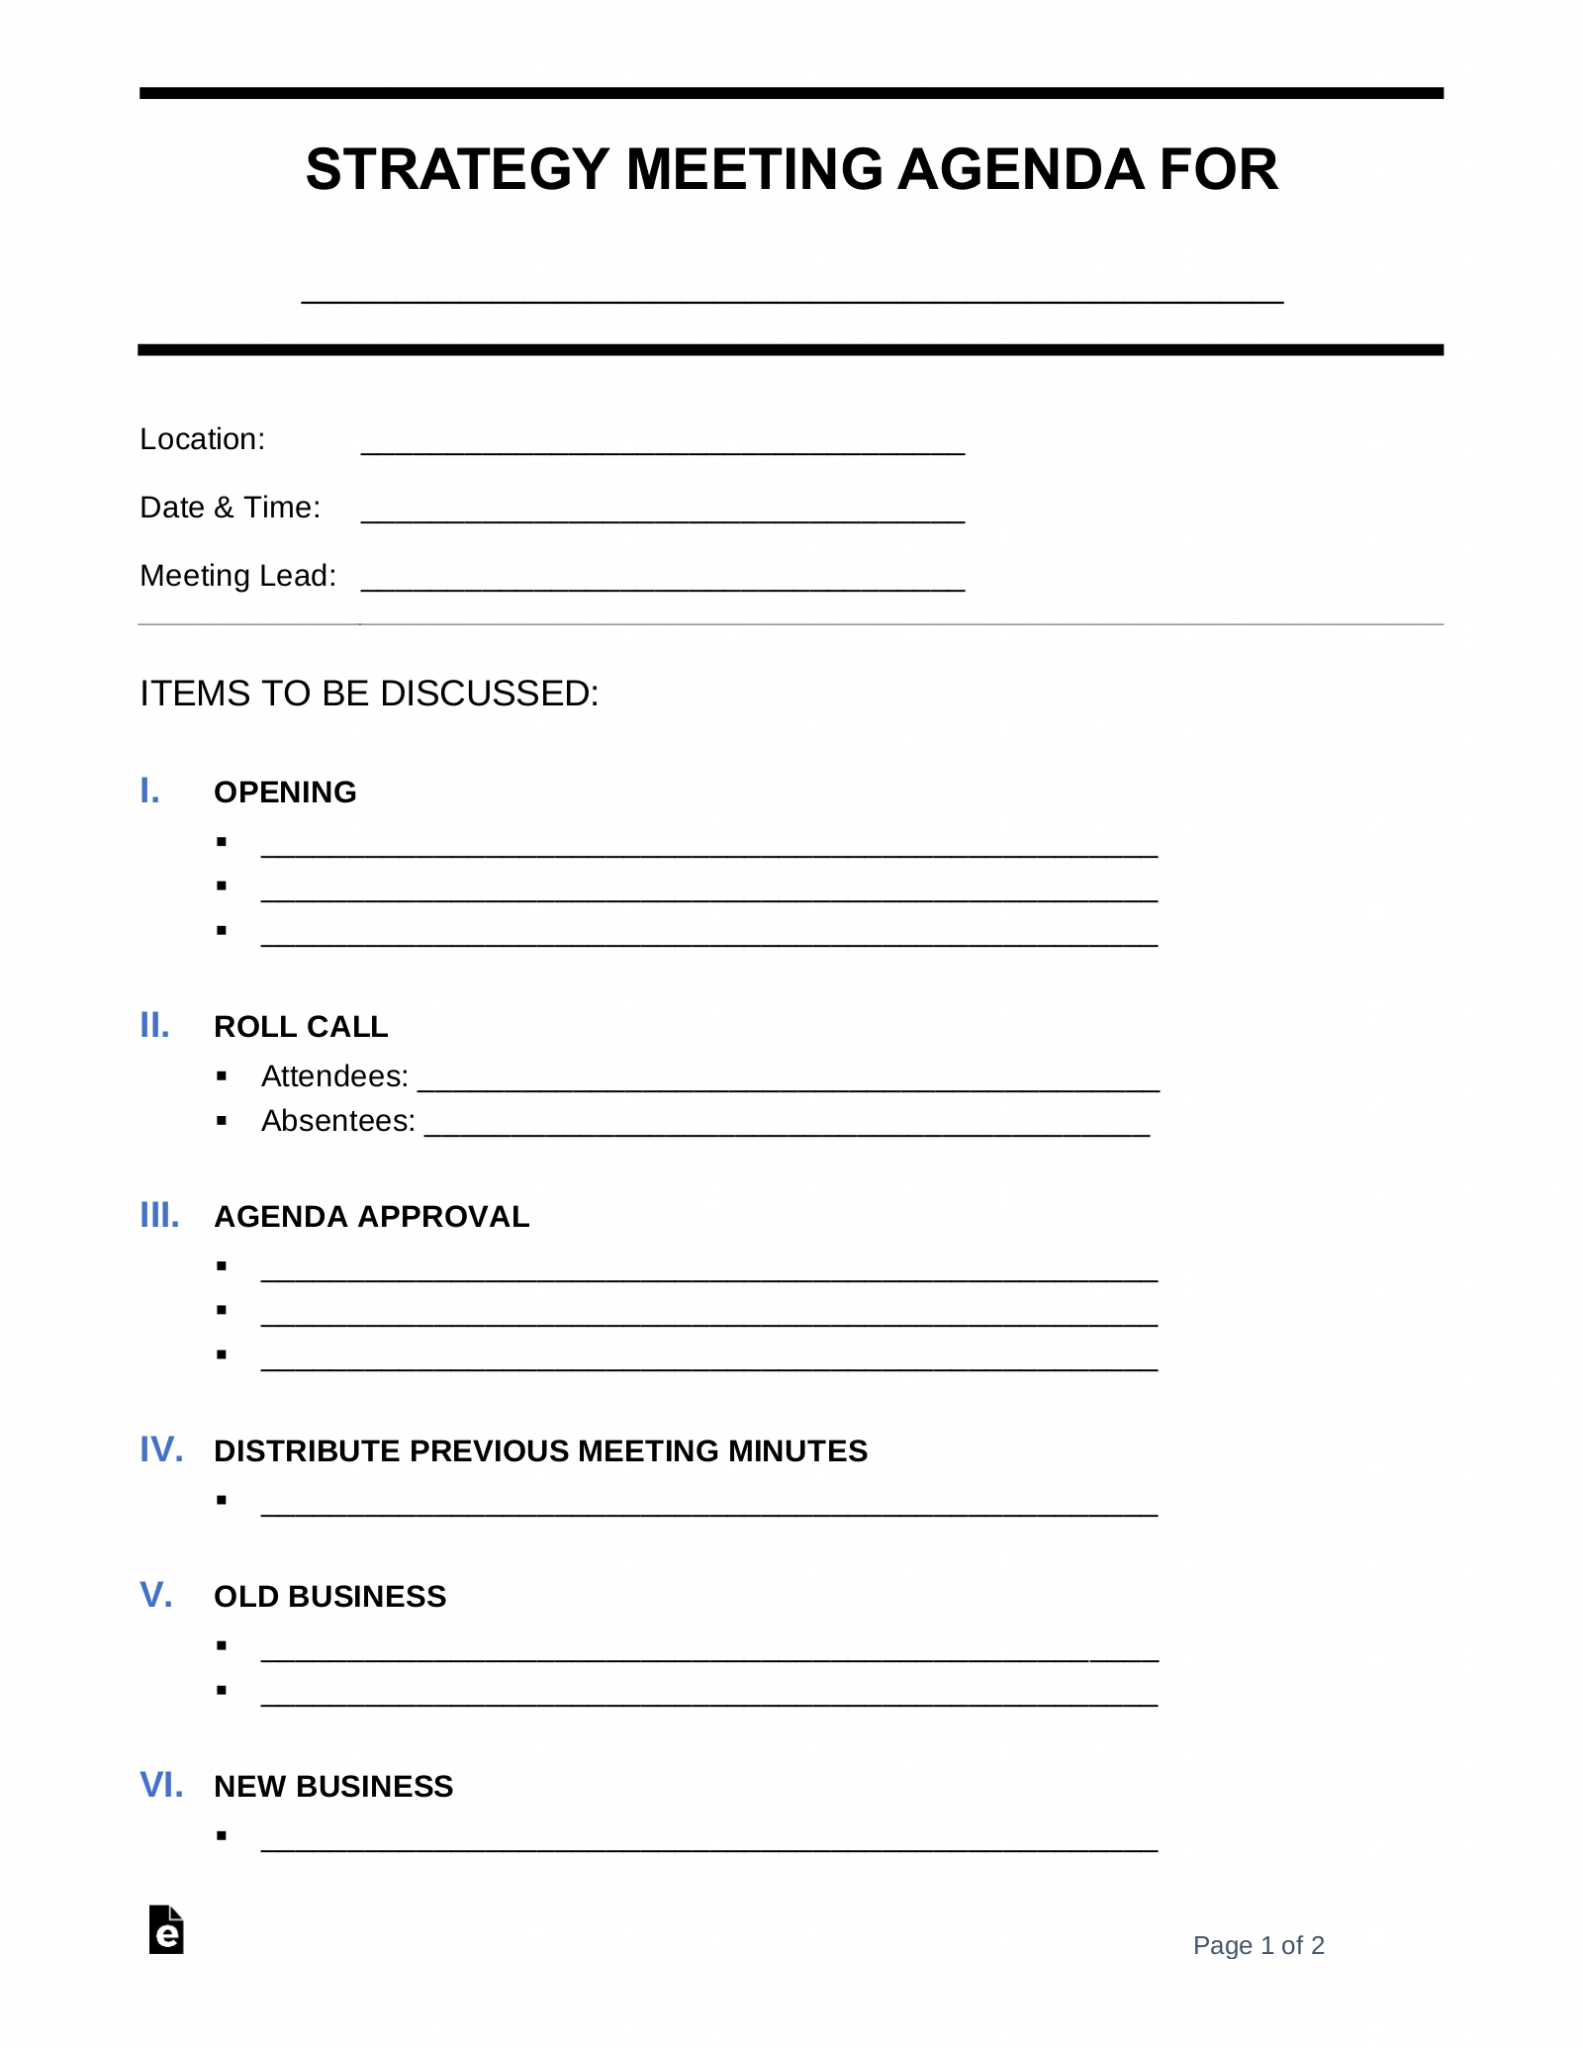 Strategy Meeting Agenda Template 10 Free Word Pdf Documents Download